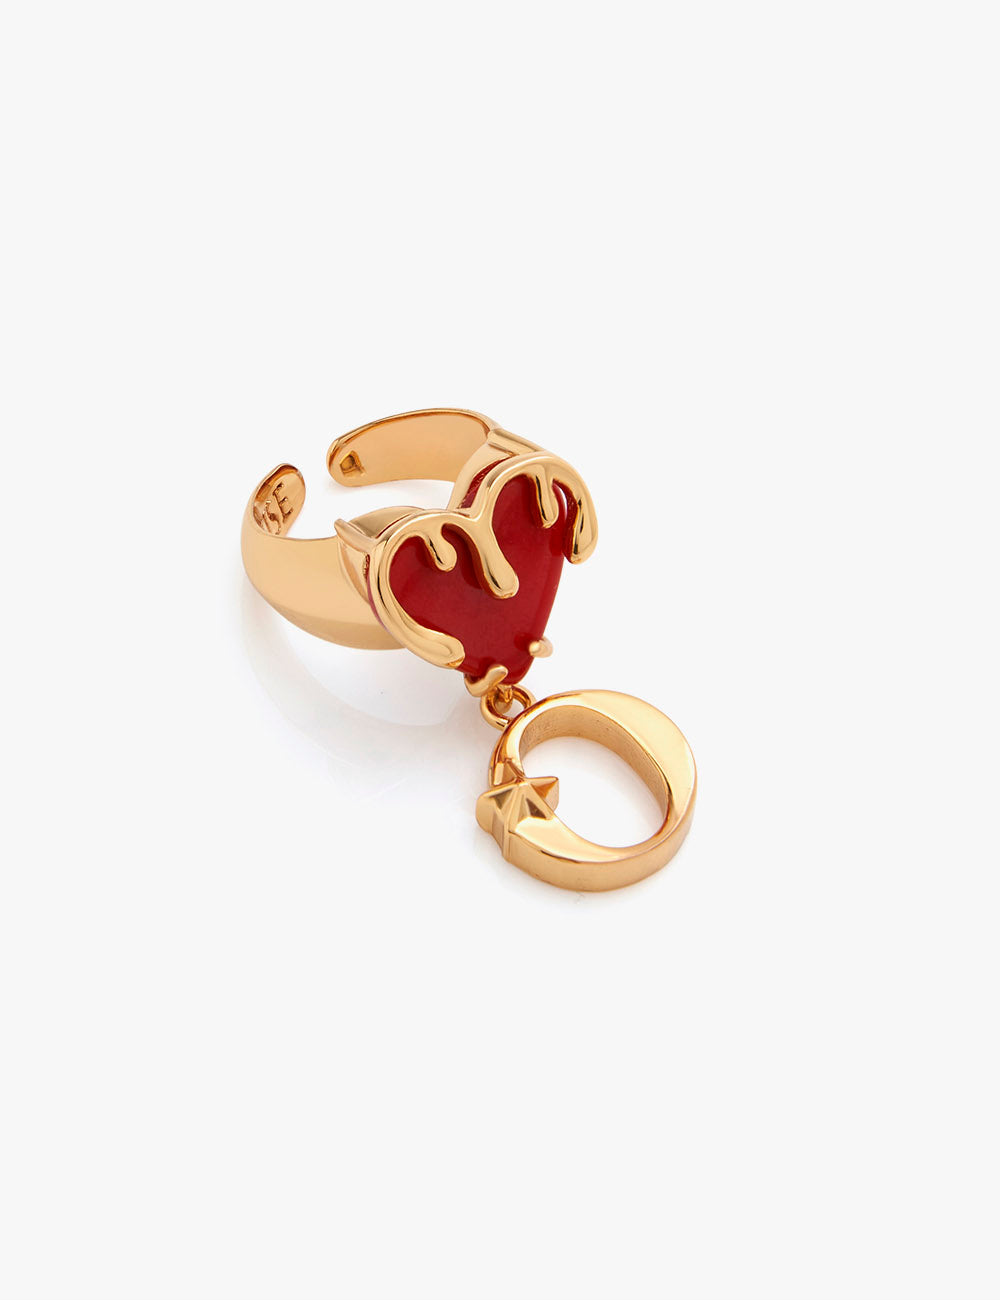 Buy Valentine gift Jewellery Stylish Heart Shape Golden Proposal i love you  Name Alphabet Letter Initial S Rings for girls women girlfriend Men Boys  Couples American diamond Crystal Gold Plated Ring Set